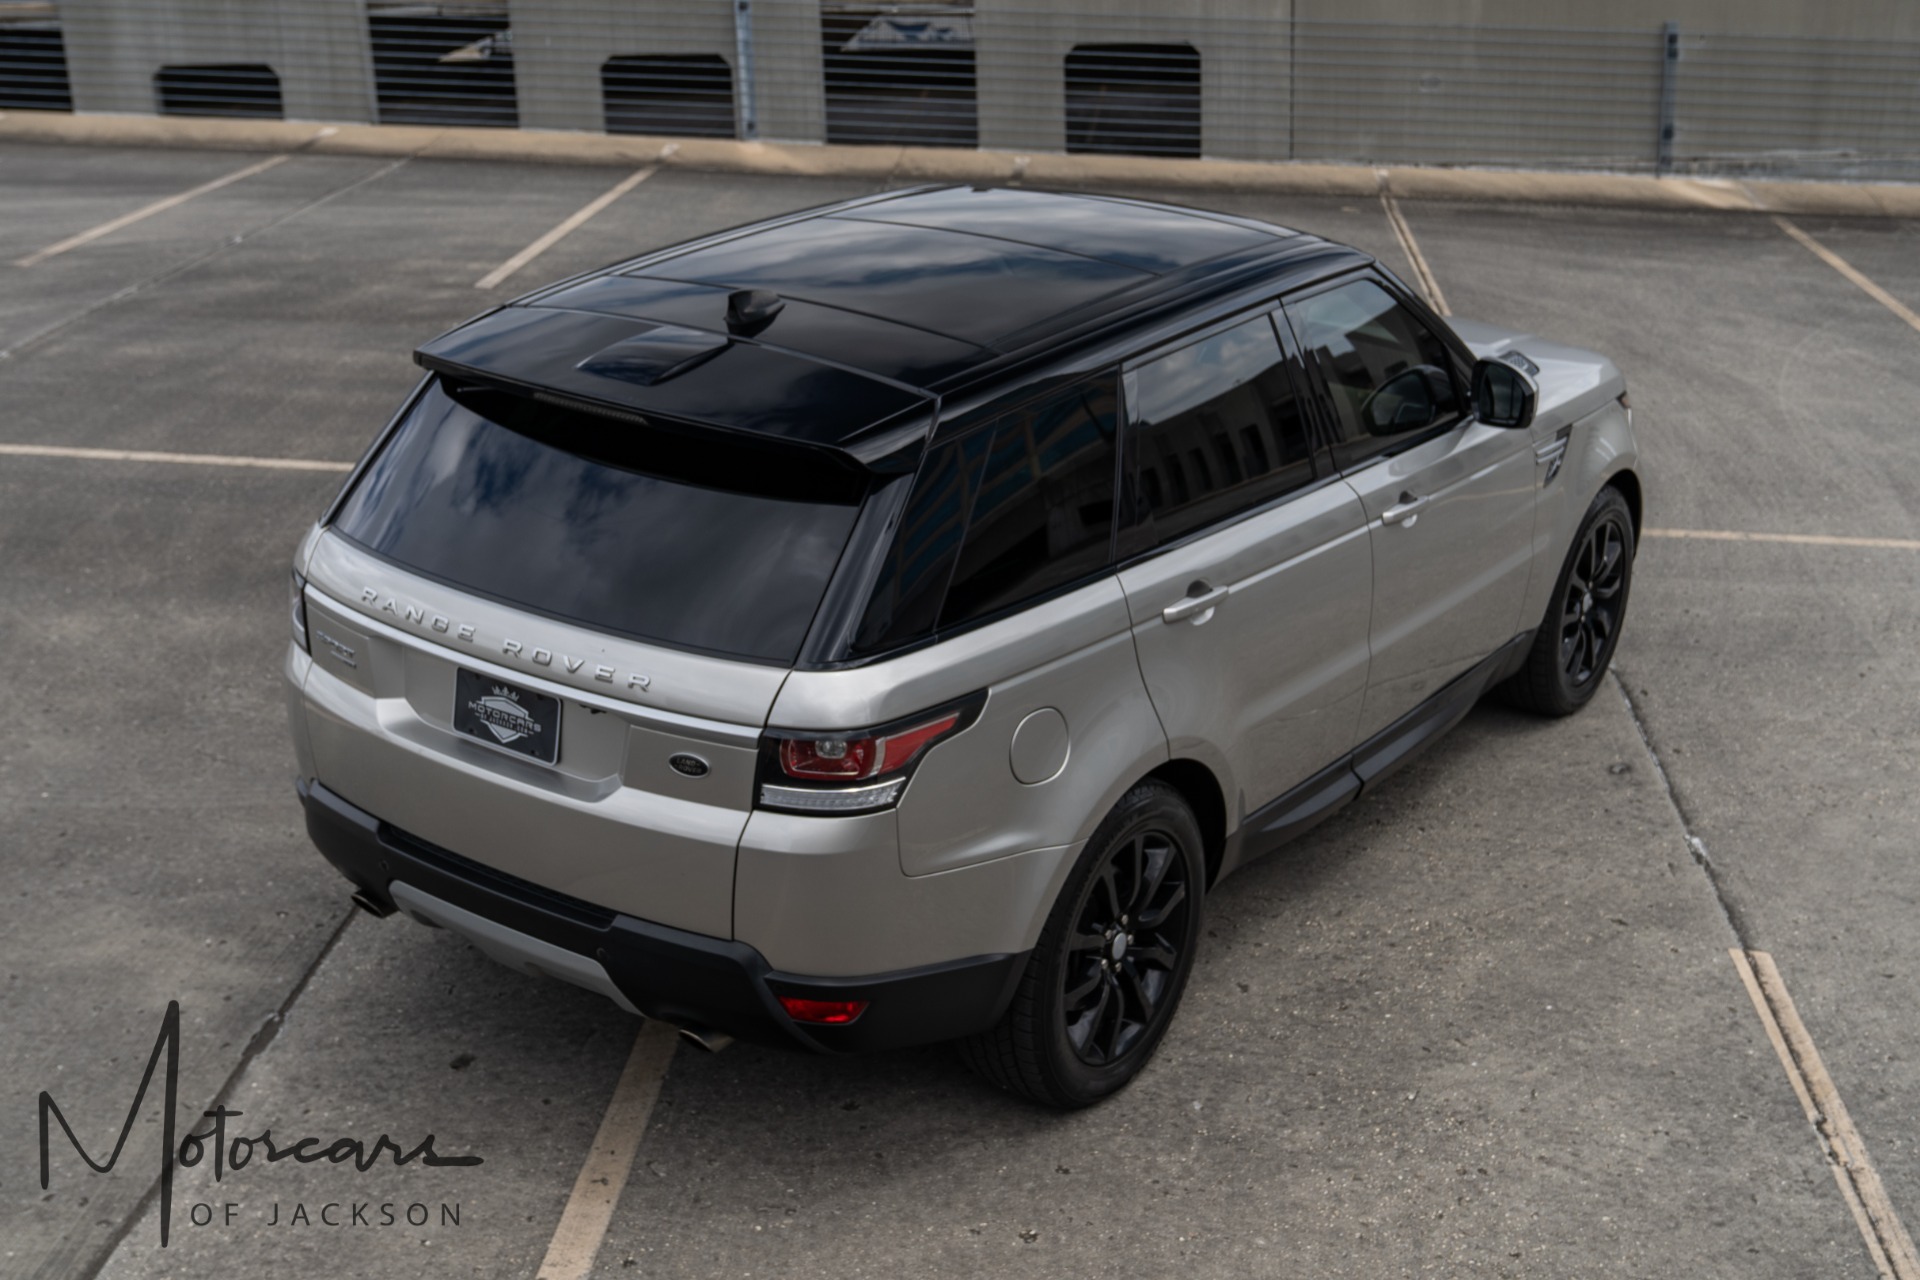 Used-2017-Land-Rover-Range-Rover-Sport-HSE-for-sale-Jackson-MS